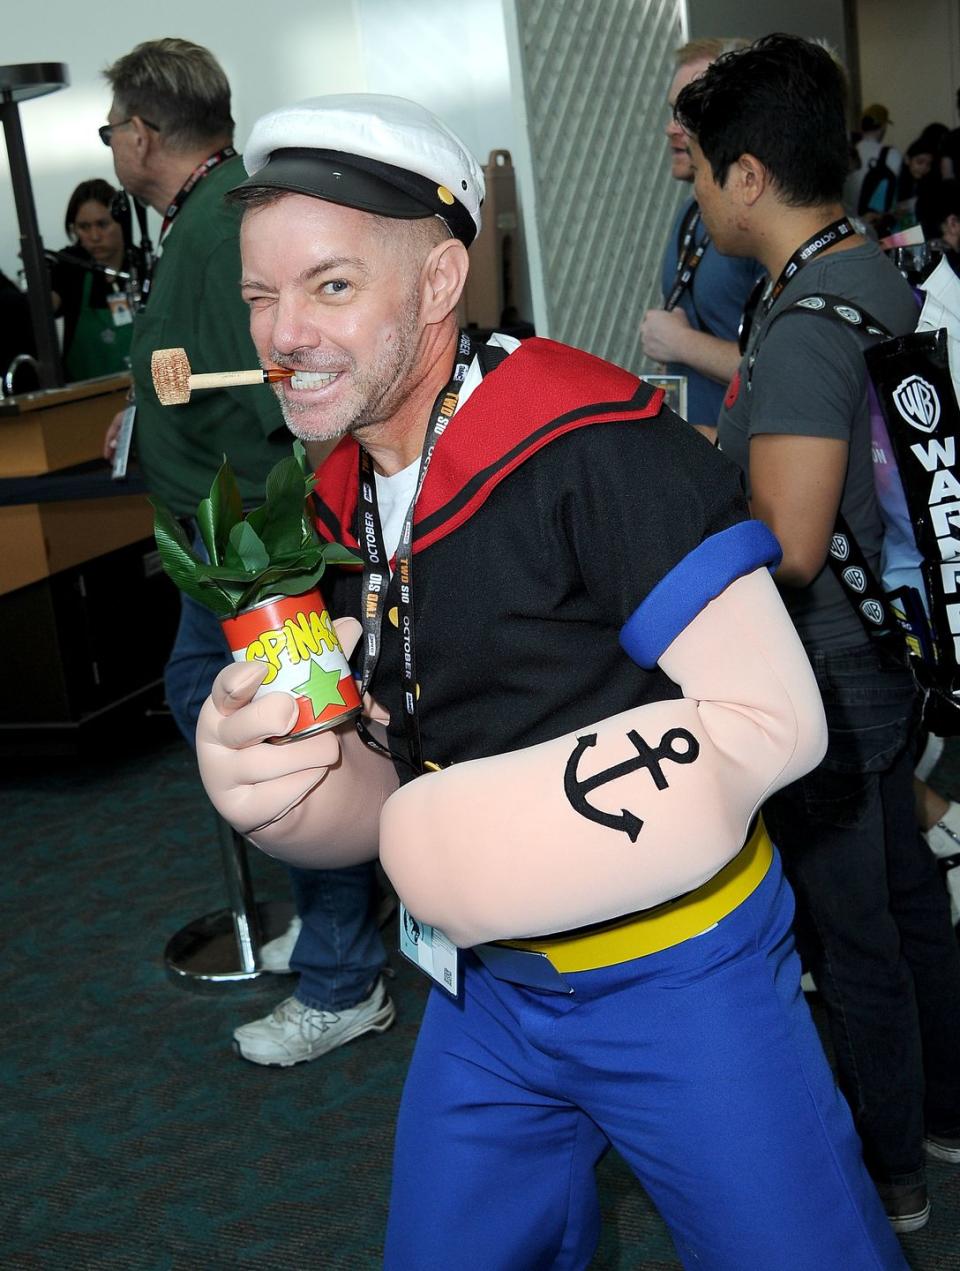 <p>Popeye needs his spinach on hand for whatever might come up at Comic Con.</p>